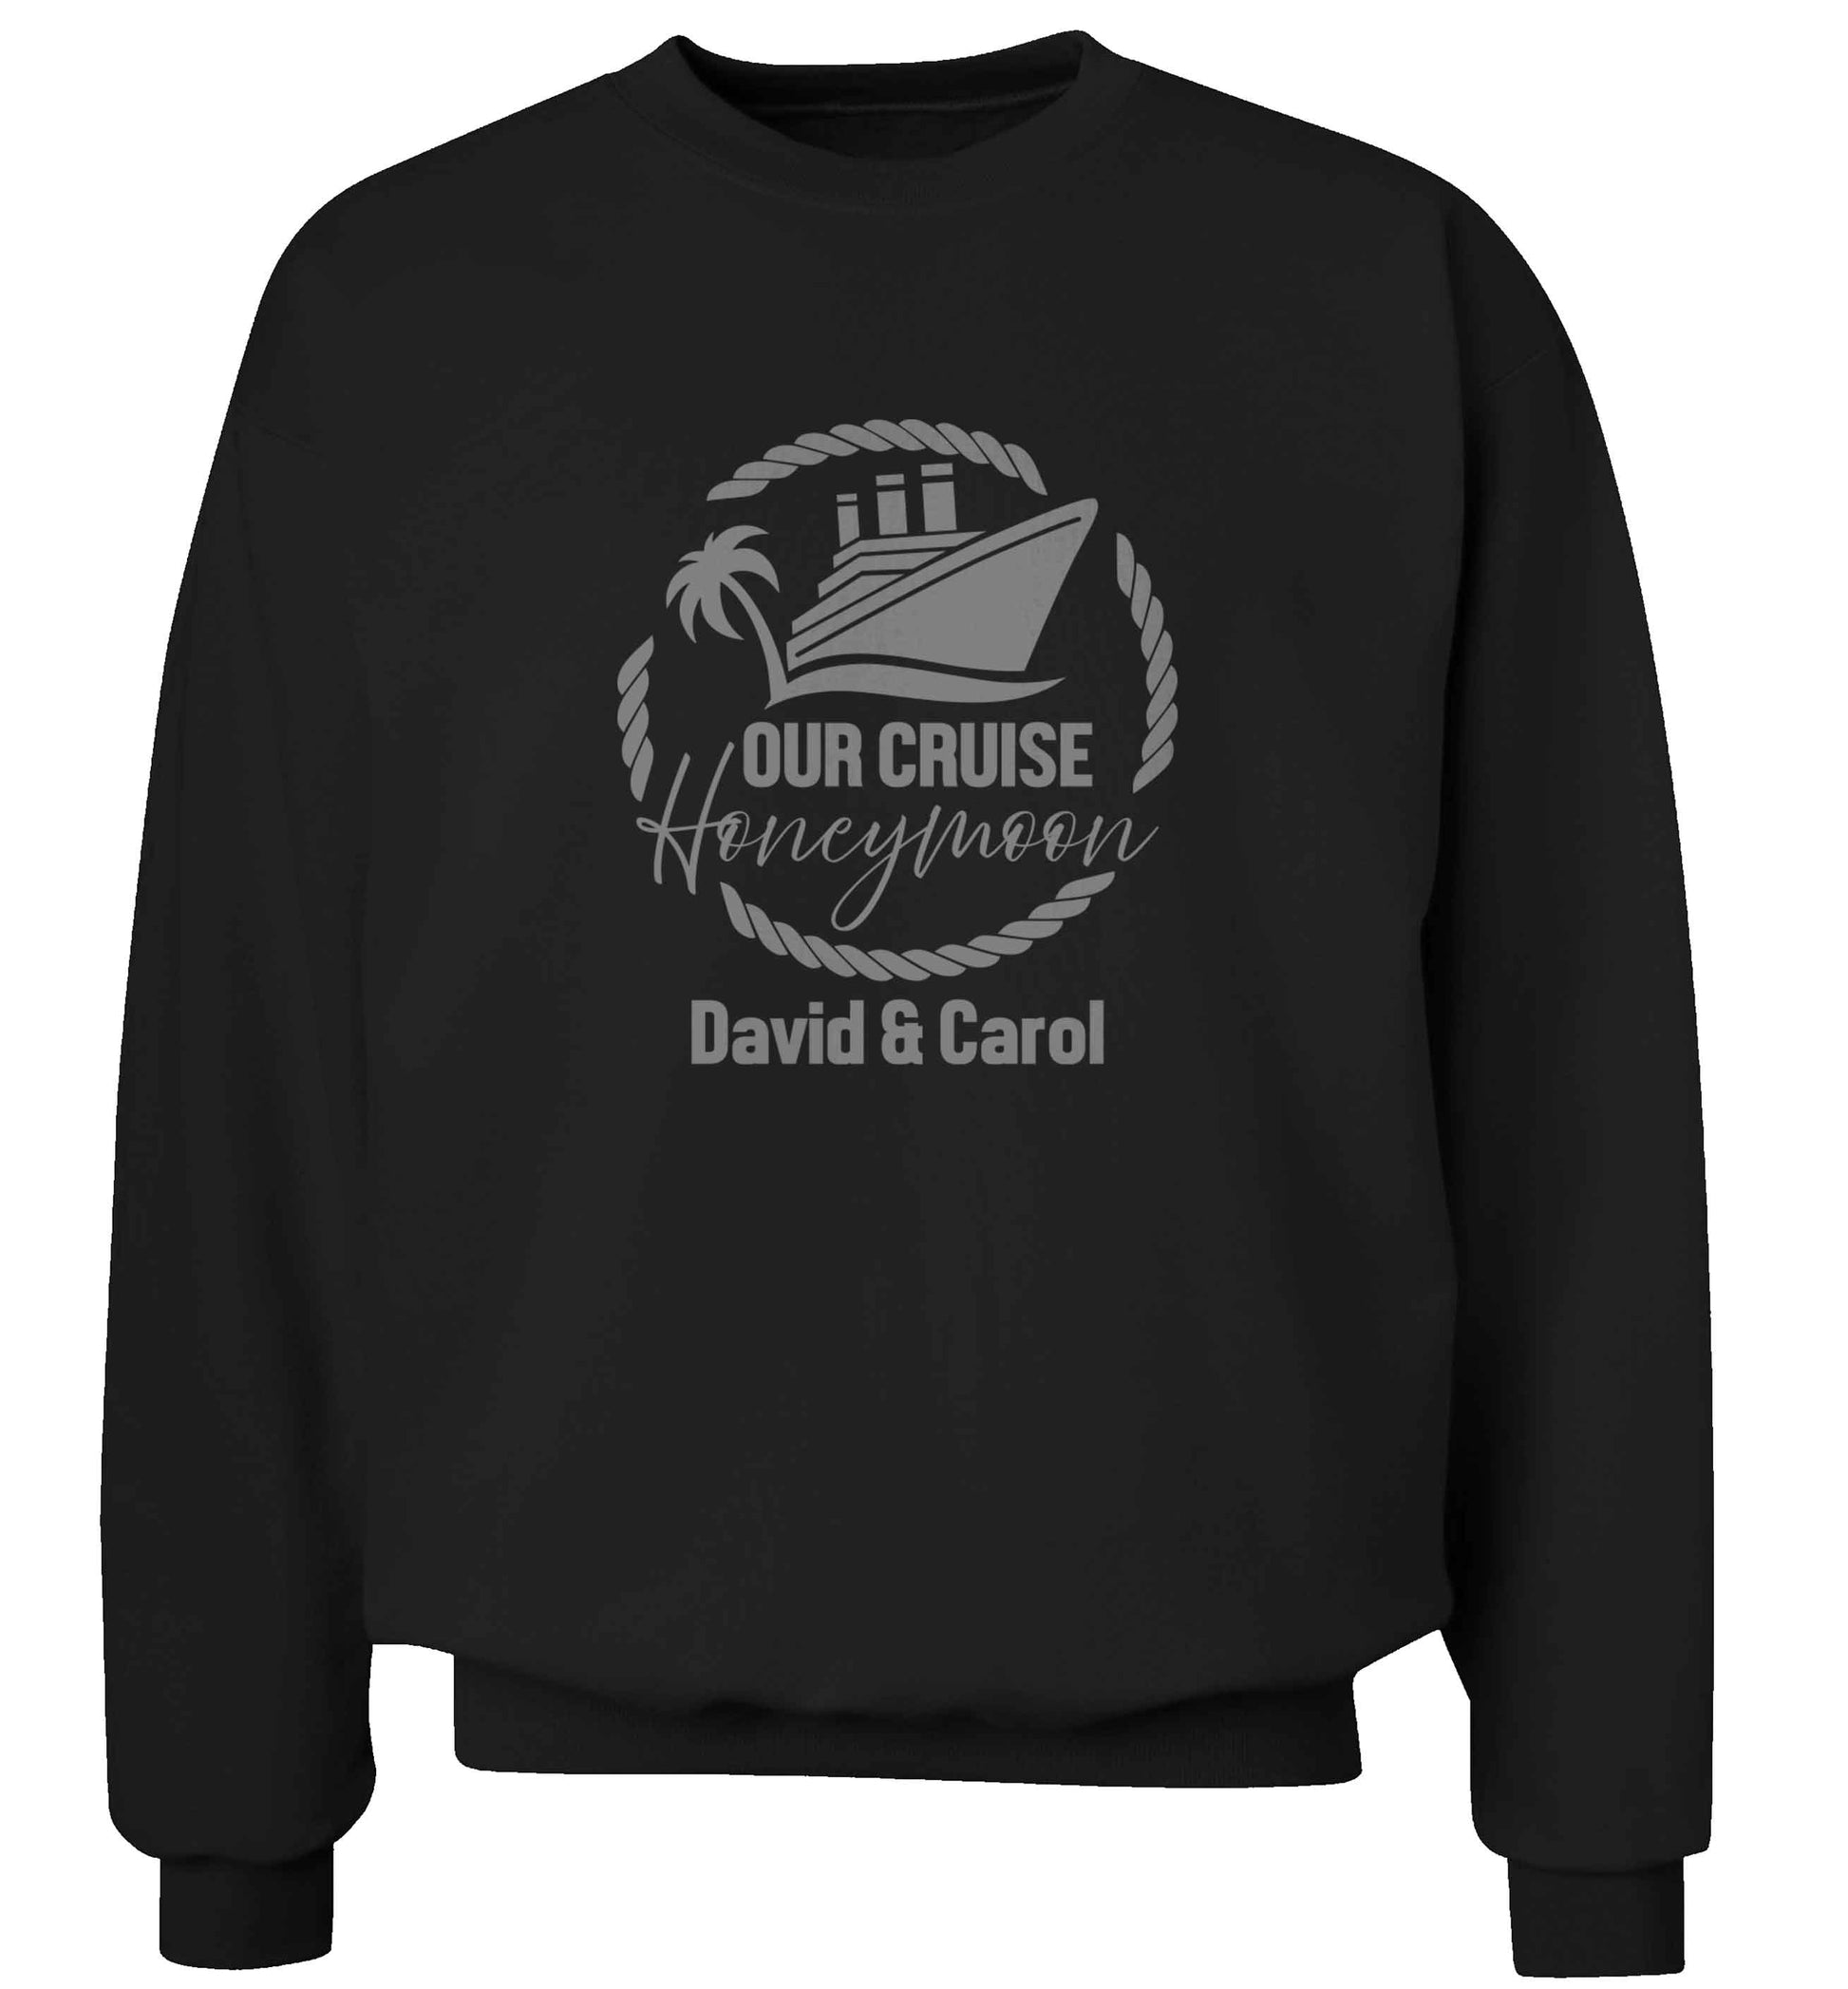 Our cruise honeymoon personalised adult's unisex black sweater 2XL